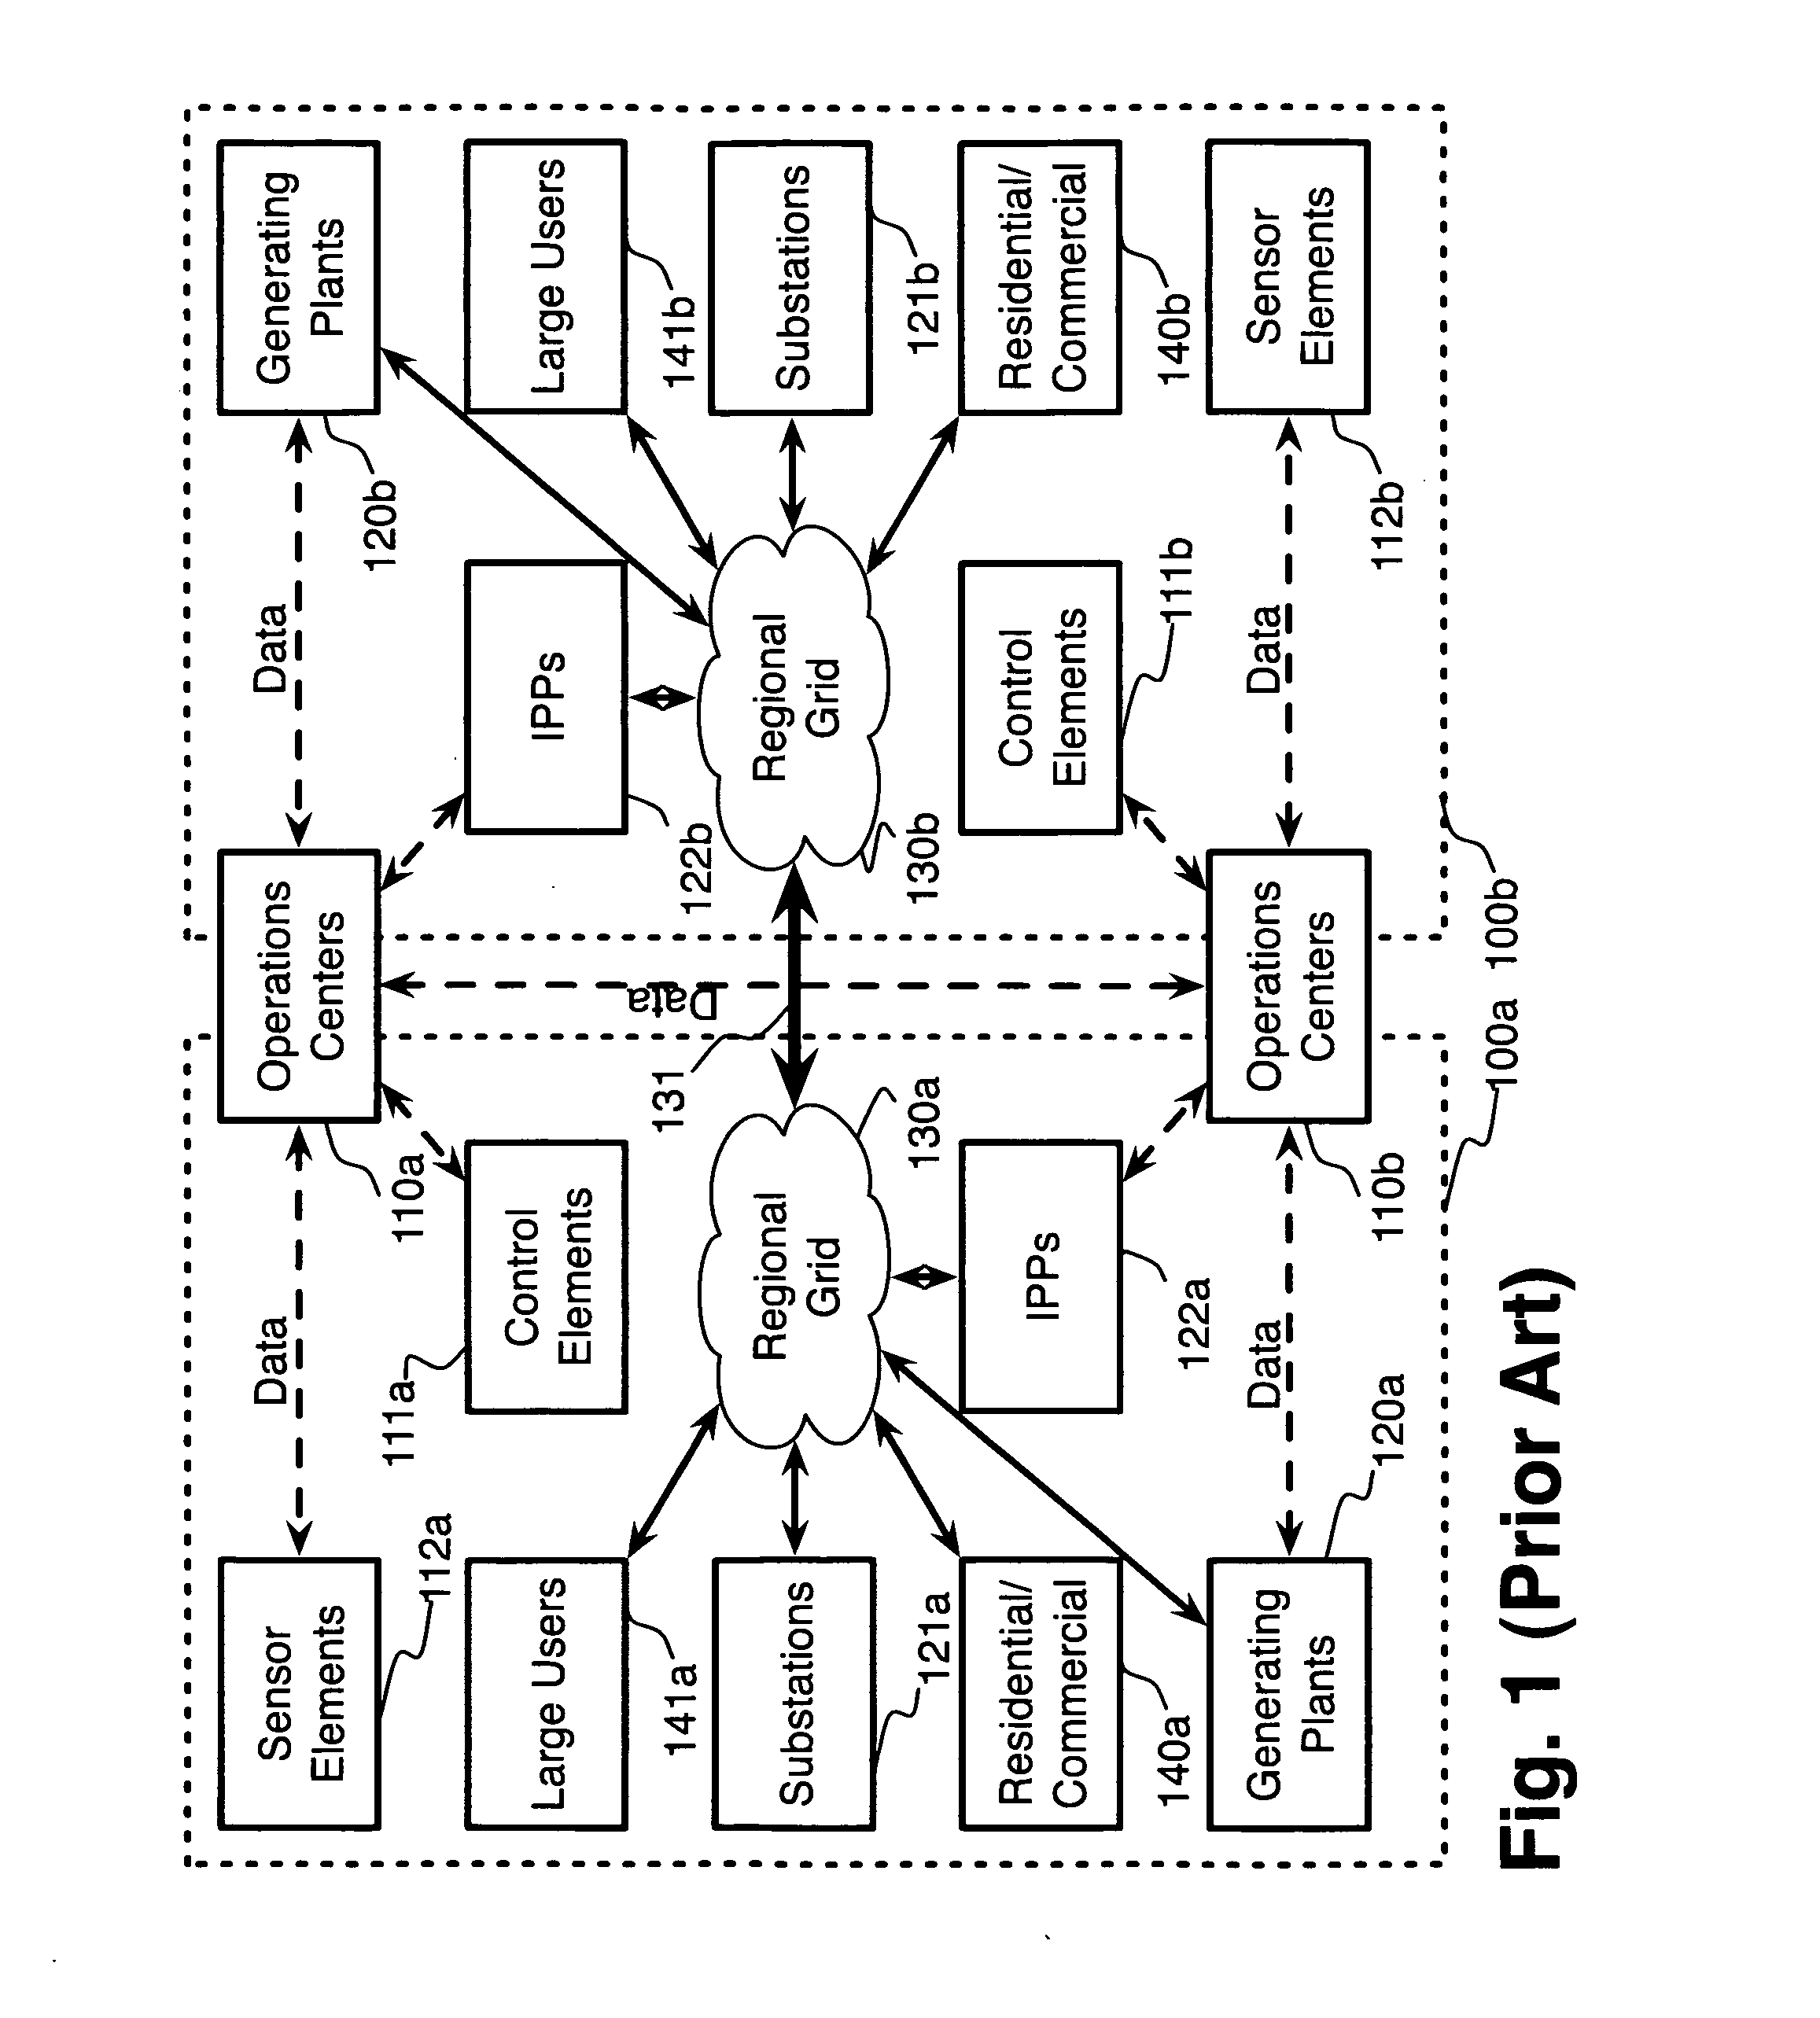 System and method for trading complex energy securities